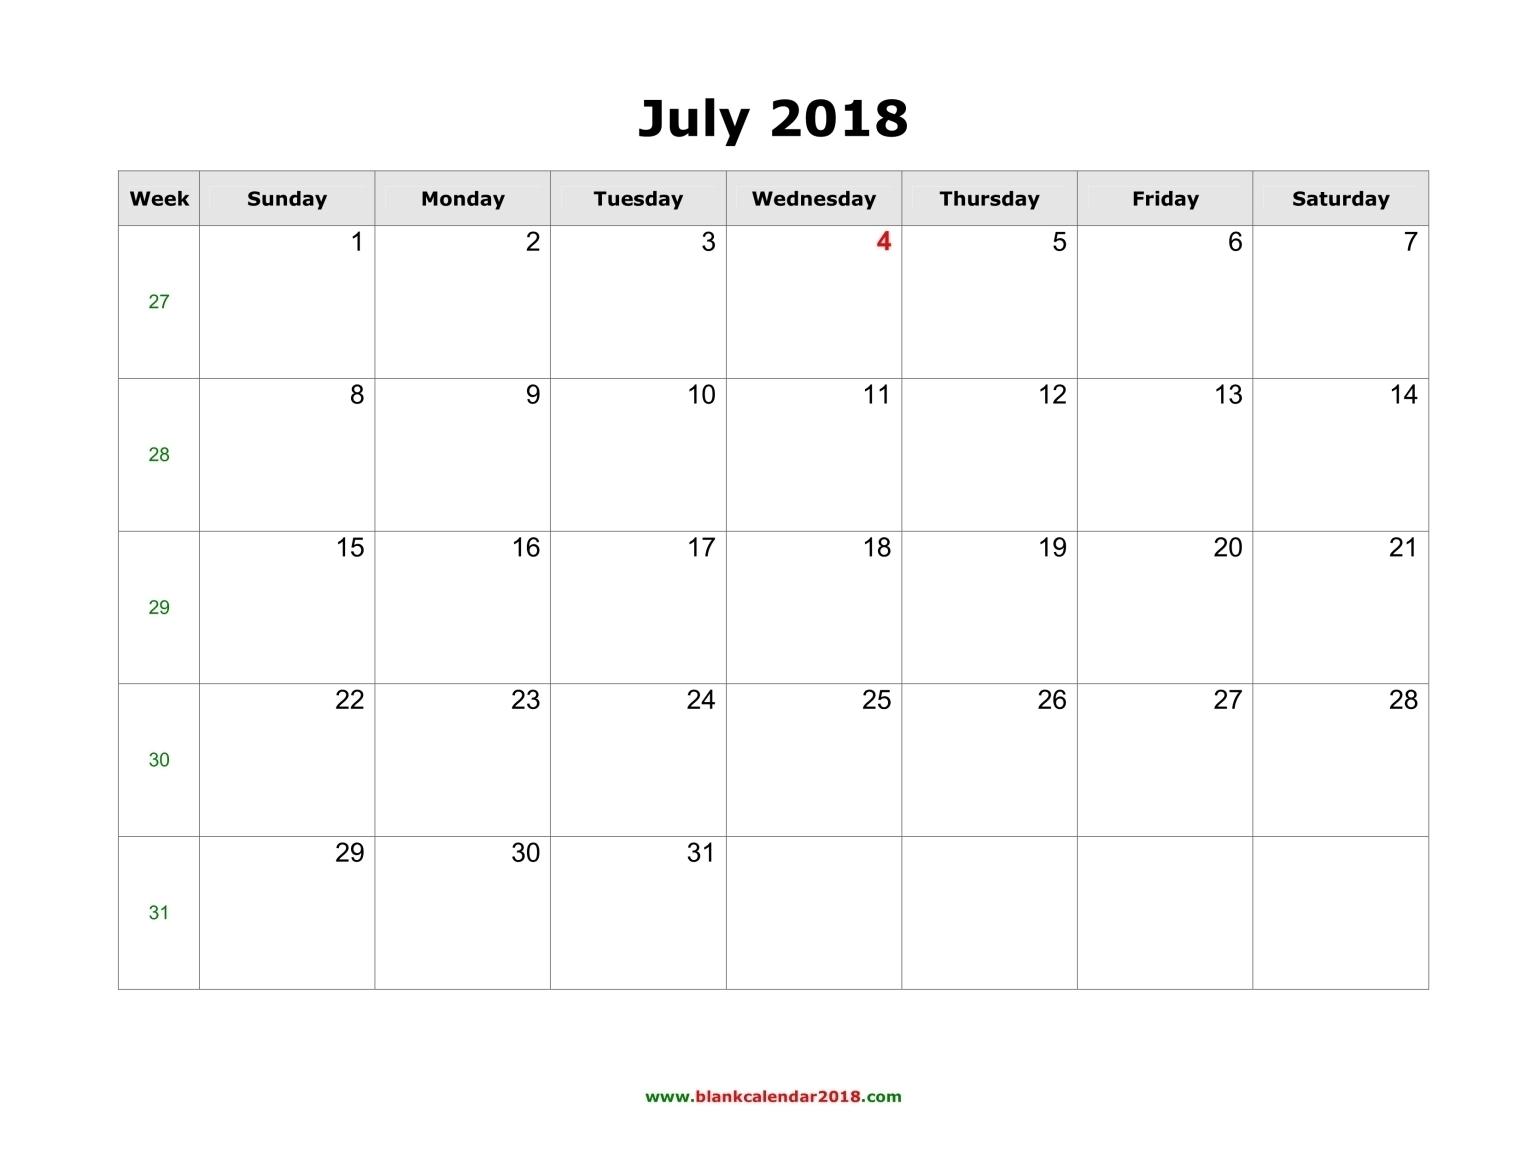 Blank Calendar For July 2018 within Small Calender For July And Agust